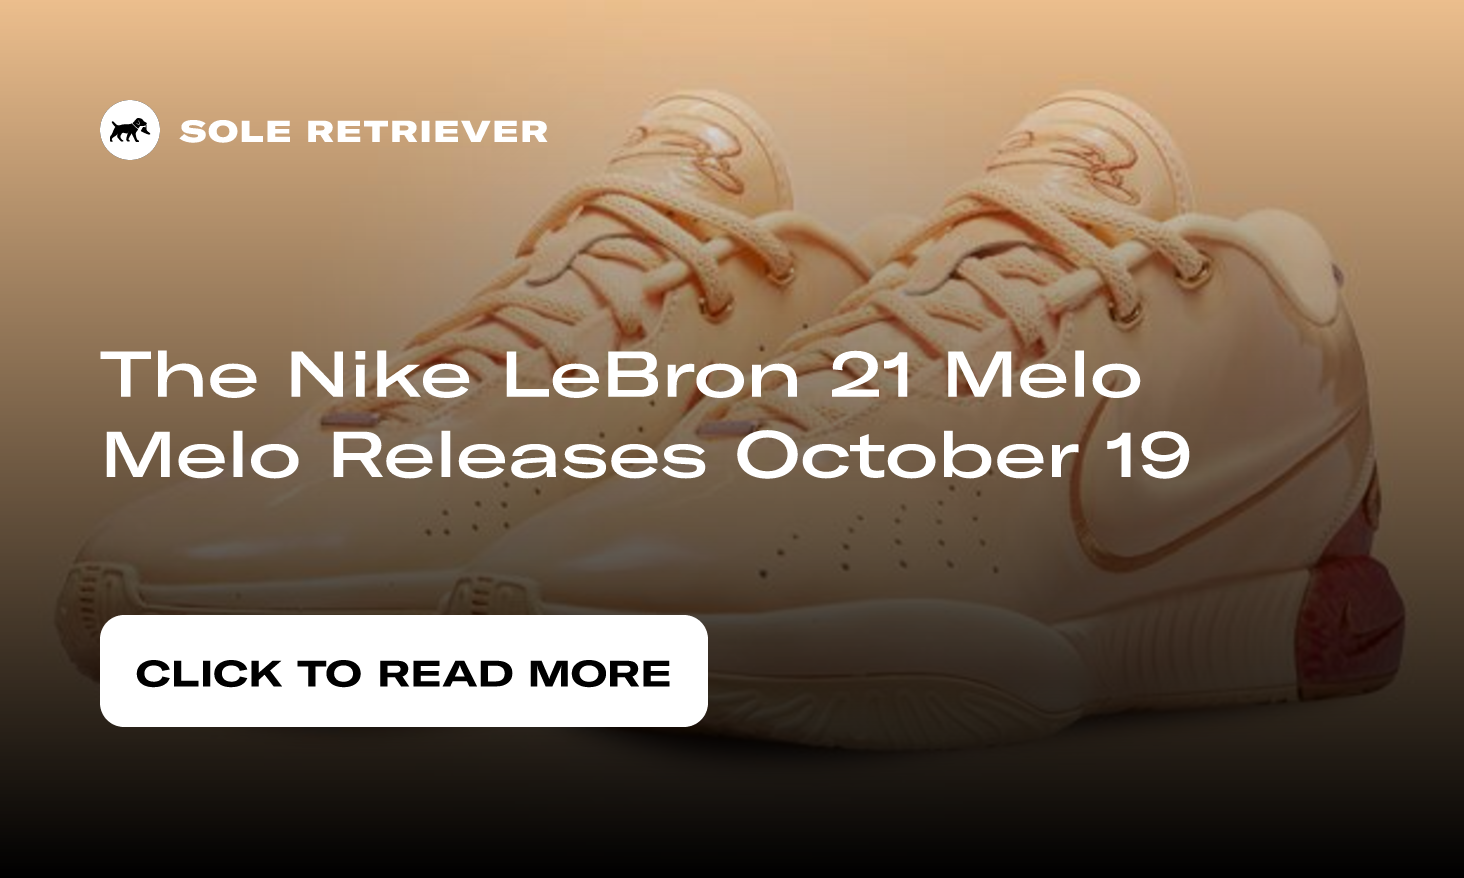 The Nike LeBron 21 Melo Melo Releases October 19